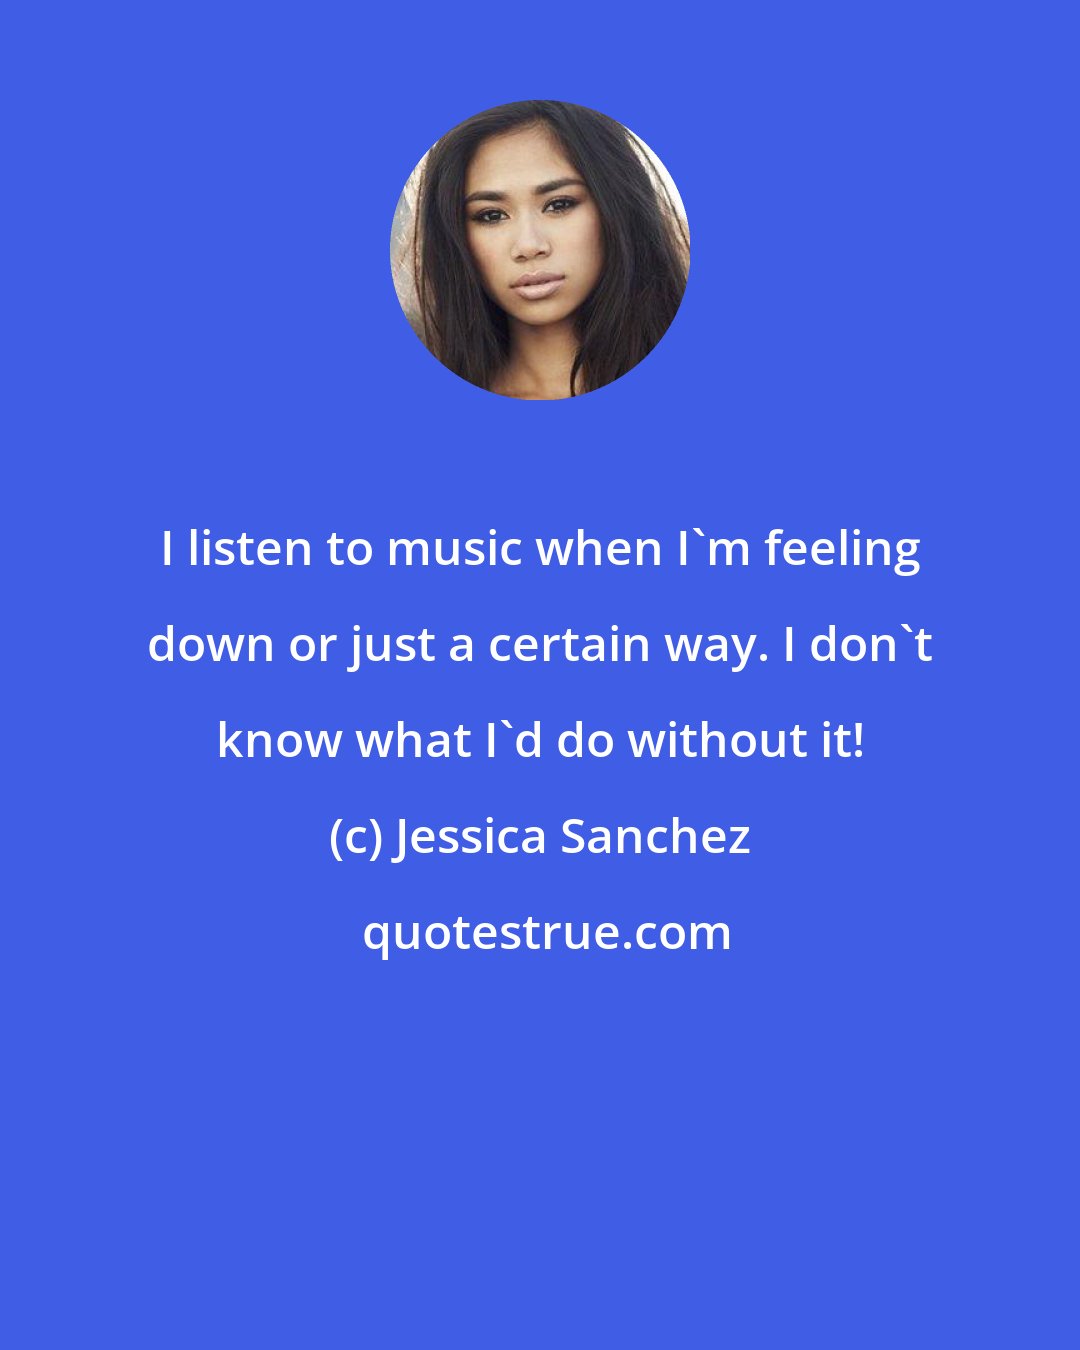 Jessica Sanchez: I listen to music when I'm feeling down or just a certain way. I don't know what I'd do without it!